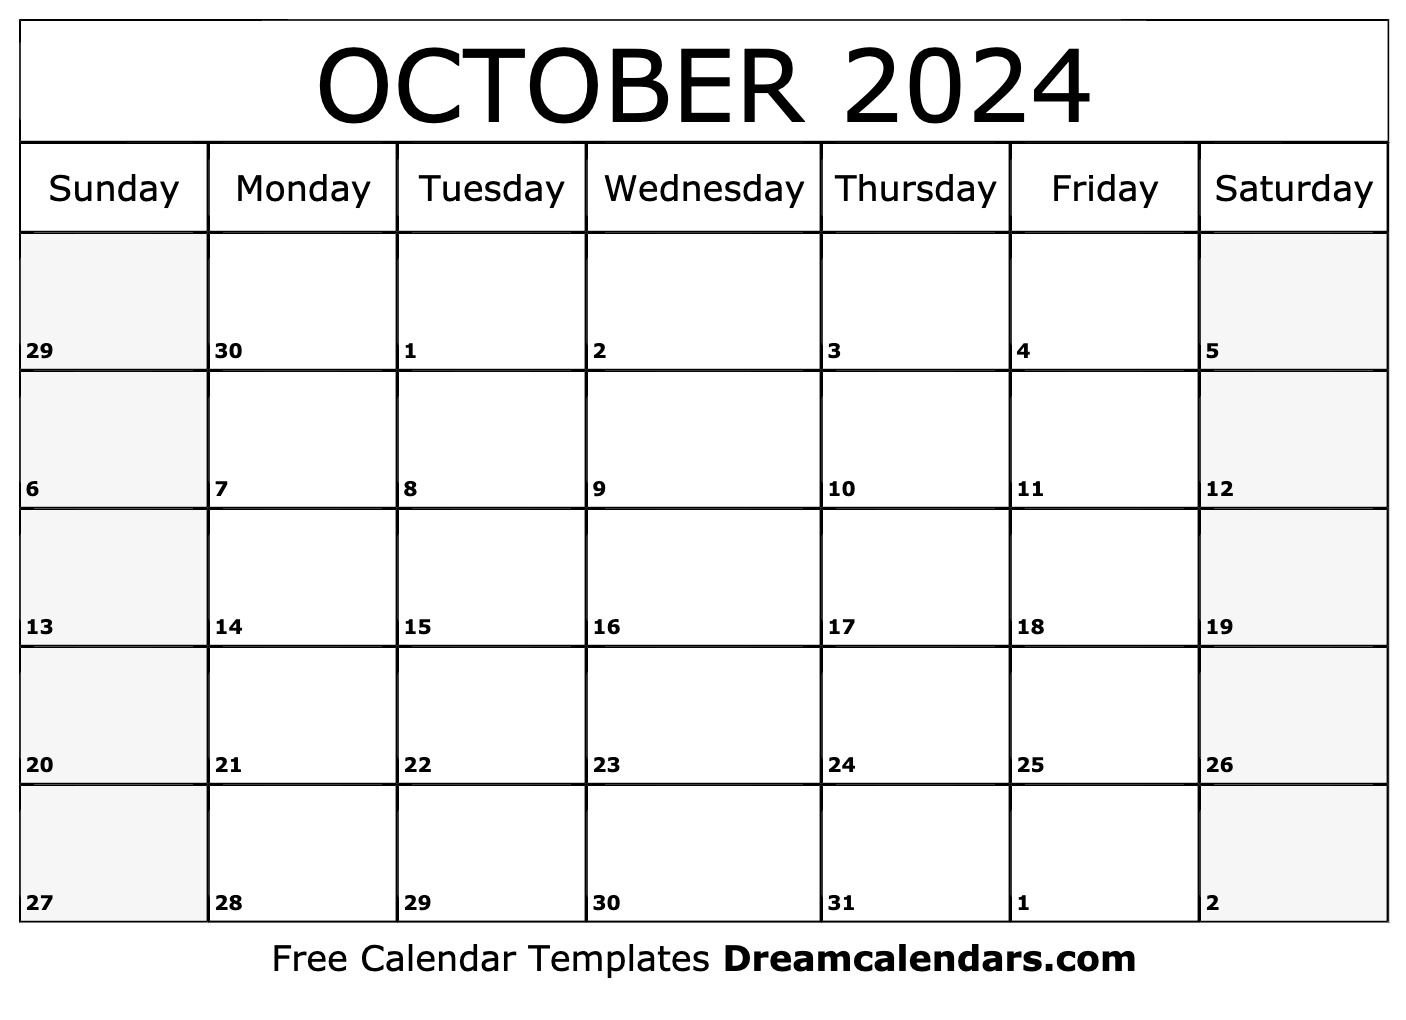 October 2024 Calendar | Free Blank Printable With Holidays for October 2024 Calendar Printable